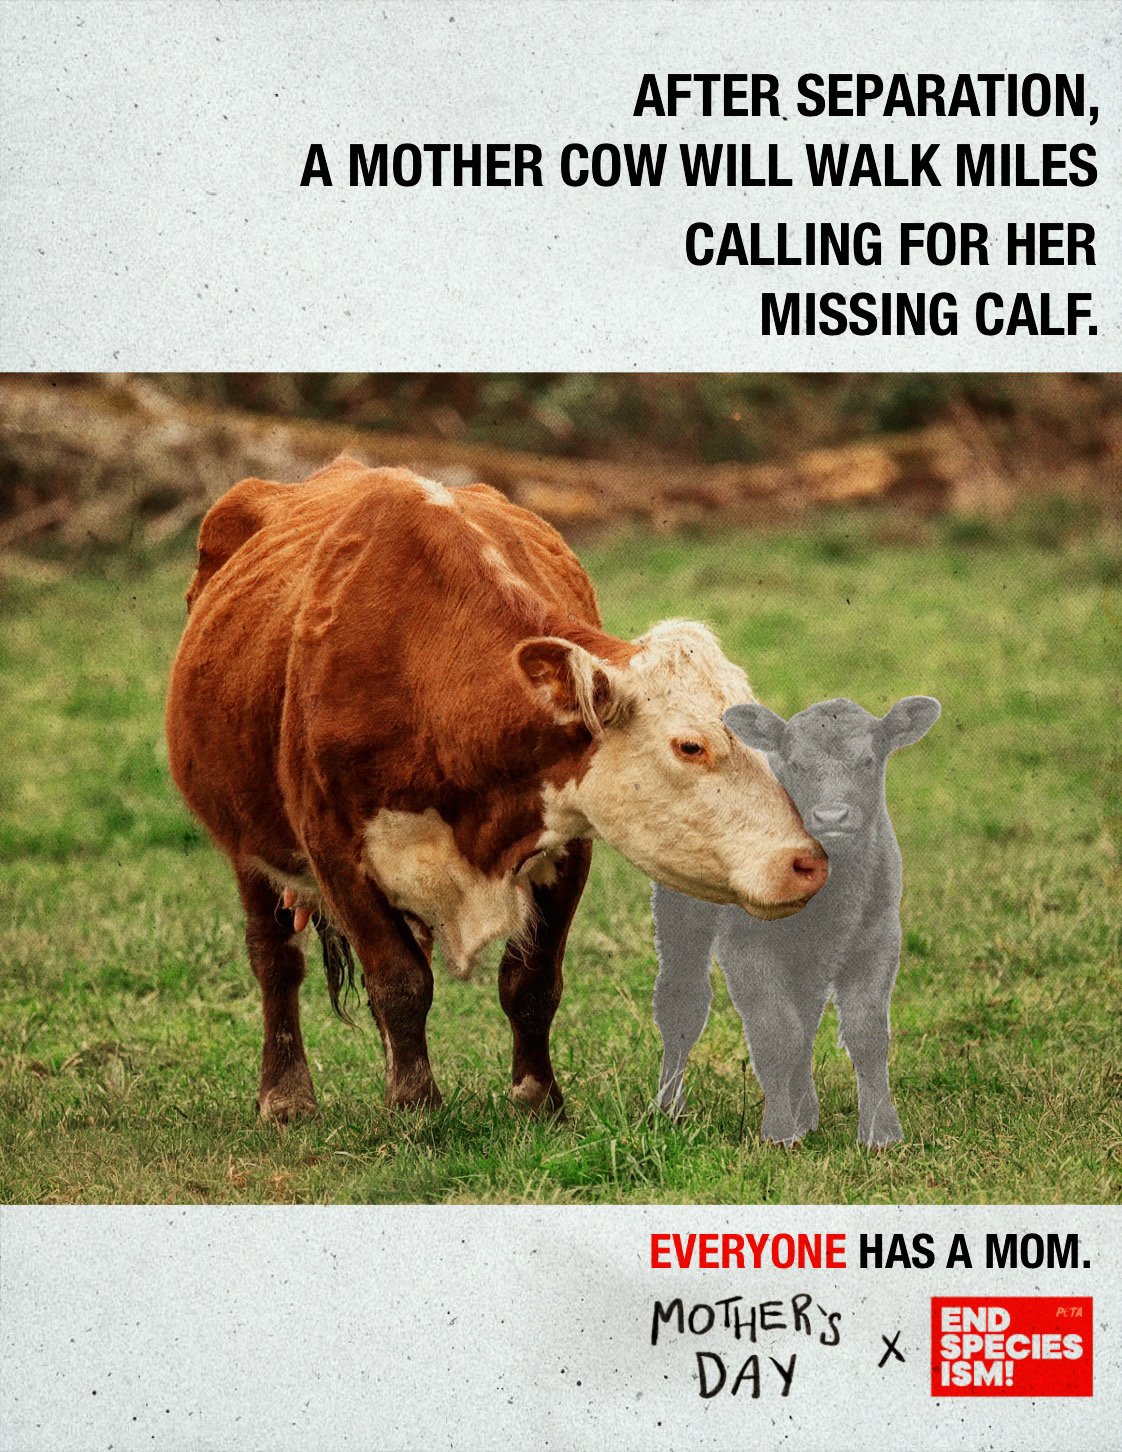 Print ad featuring a cow and a greyed-out calf at her side. The text at the top reads "After separation a mother cow will walk miles calling for her missing calf." and the bottom text reads "everyone has a mom. Mother's Day X End Speciesism!"